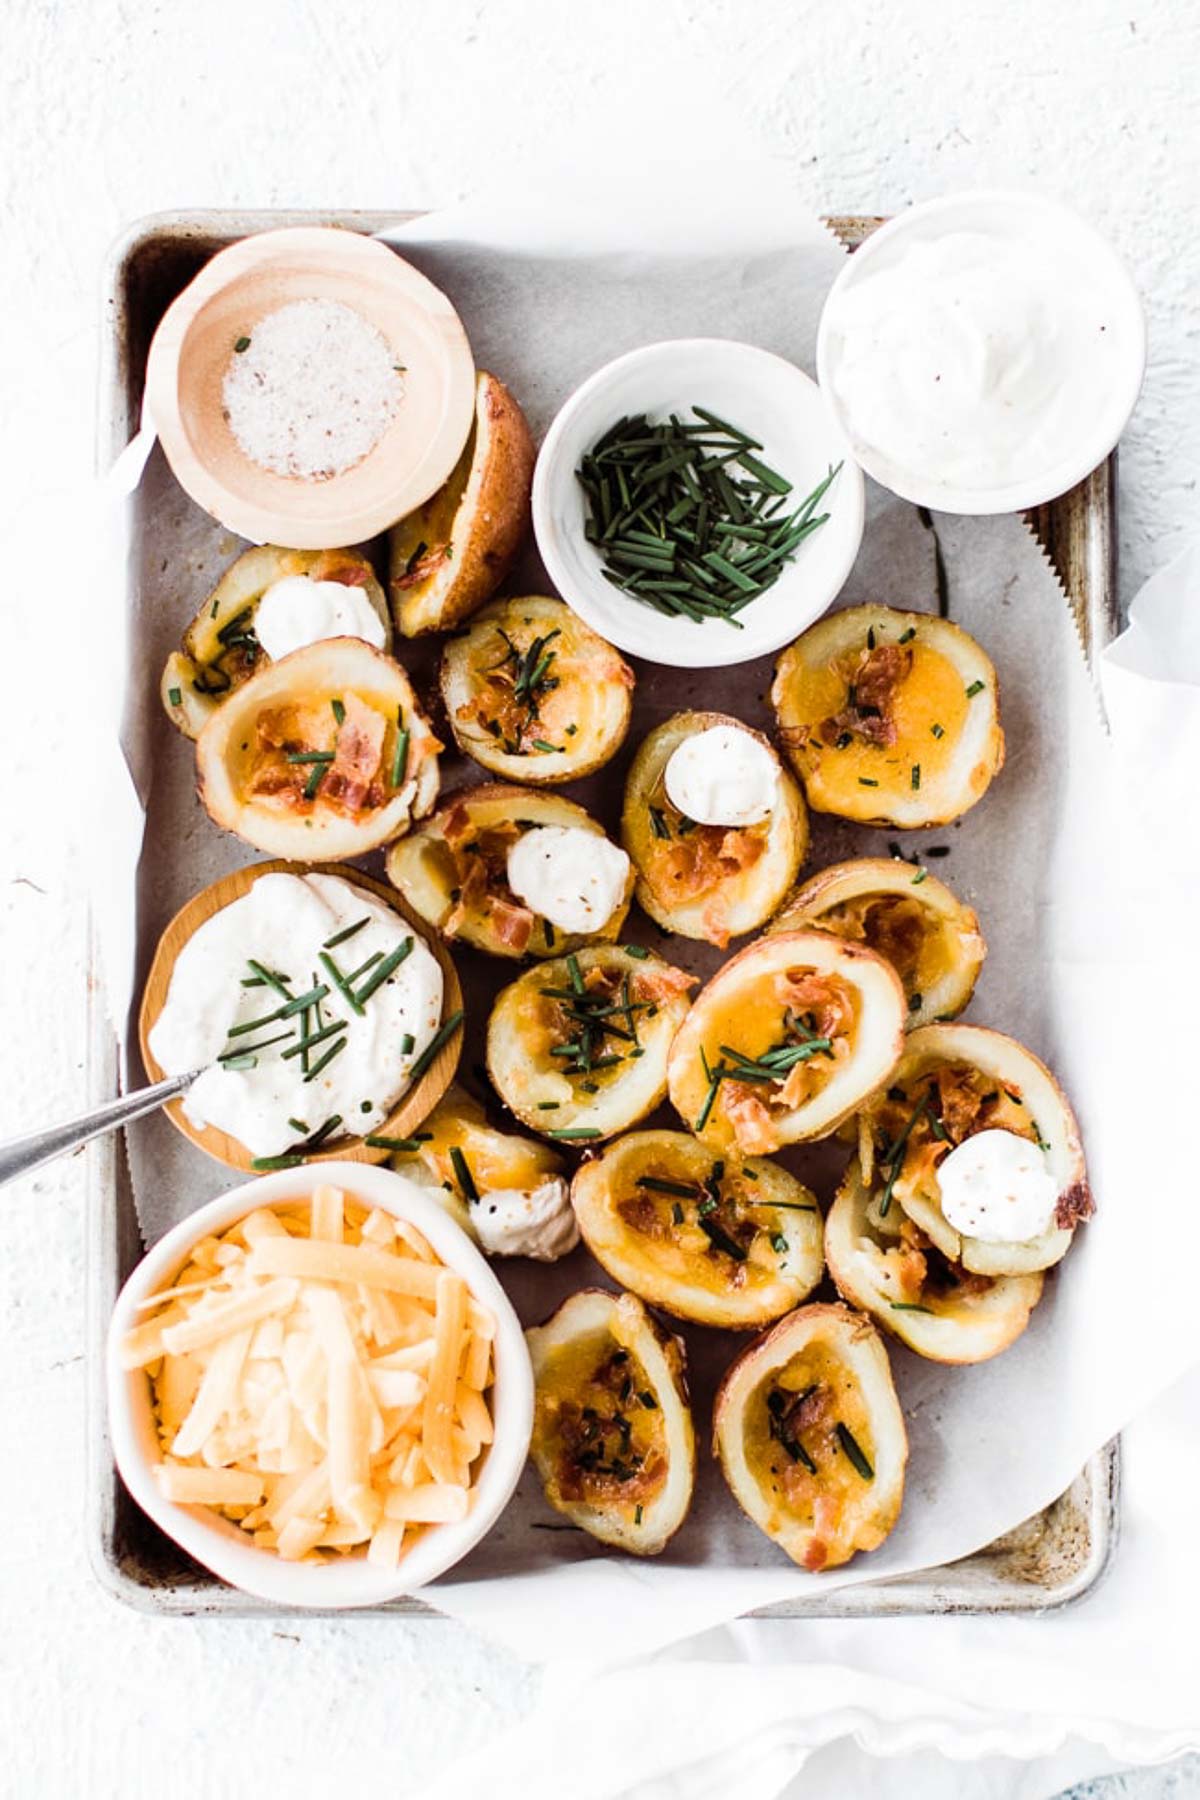 Potato skins on a tray with sour cream.